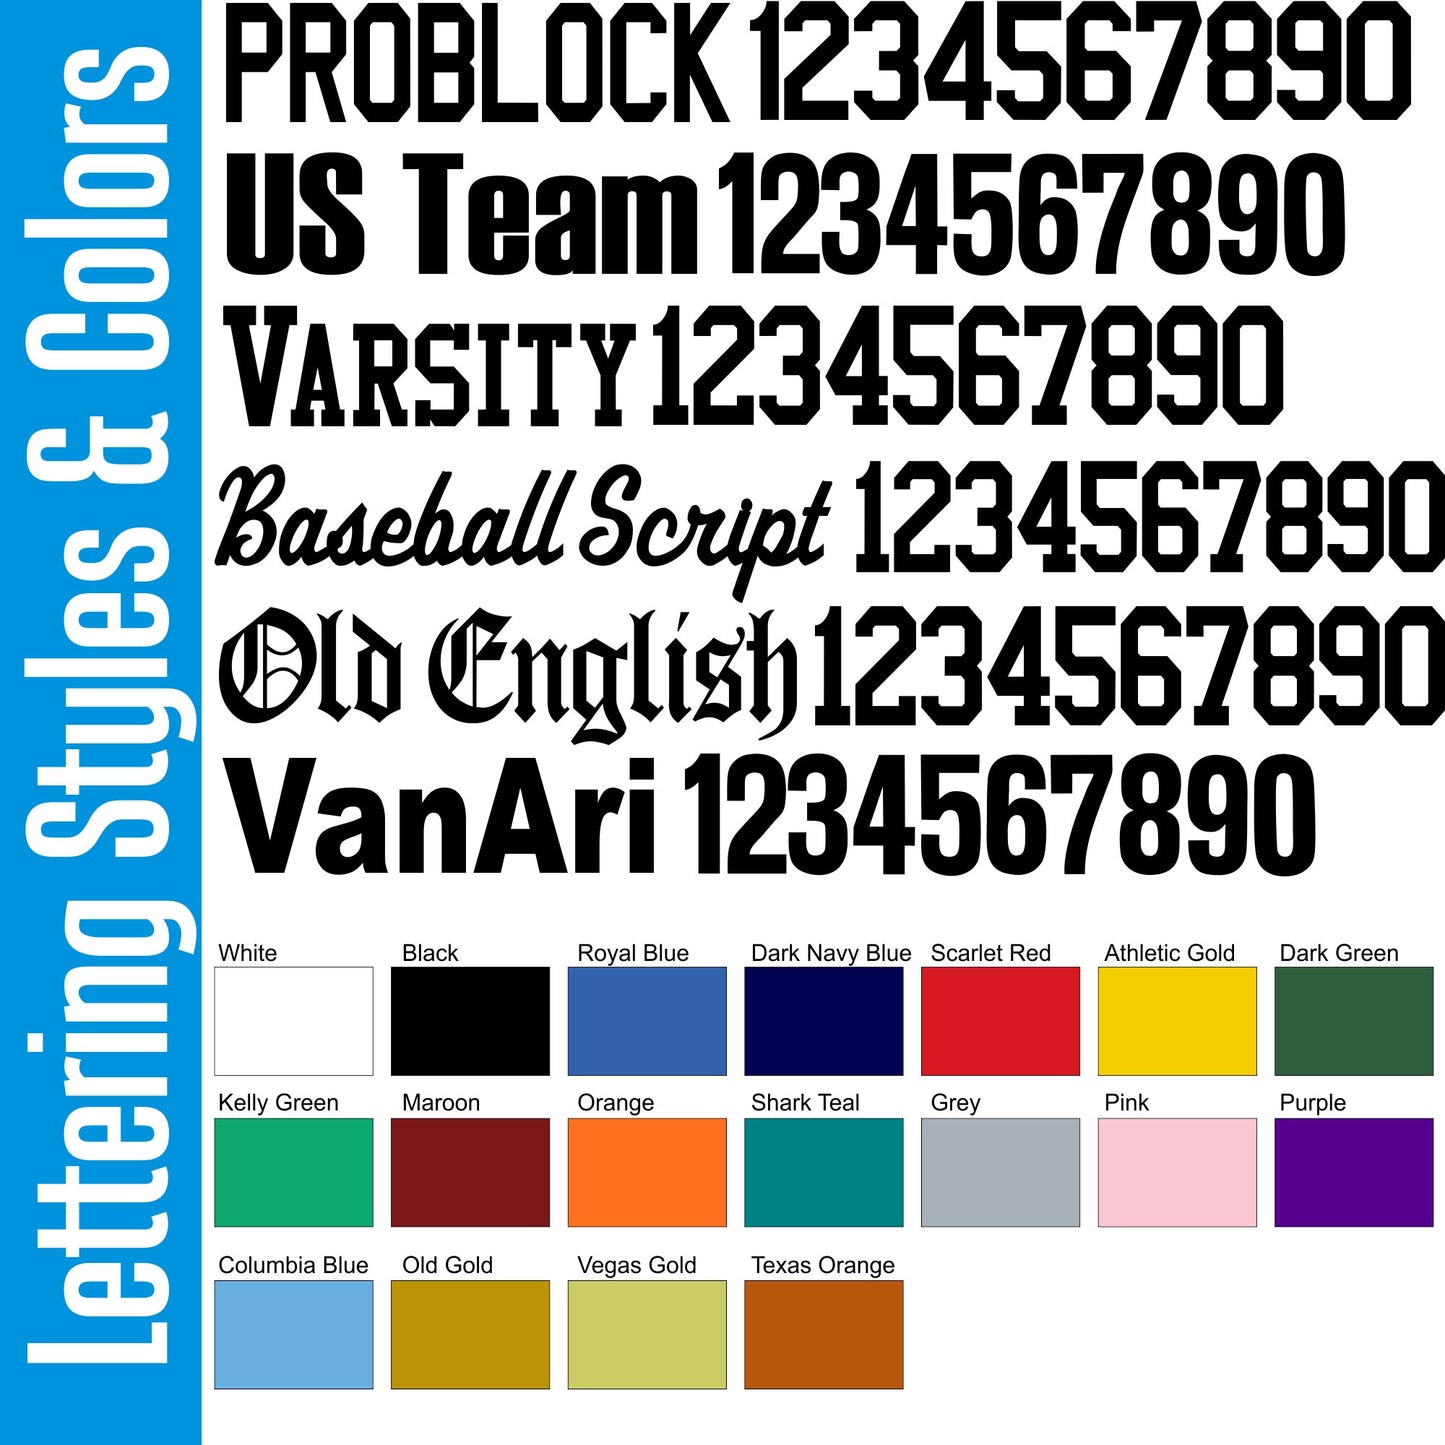 Full Button Custom Baseball Jersey | Solid Colors Black, Orange, Silver, Dark Green, Maroon Logo Design with your Team, Player, Numbers